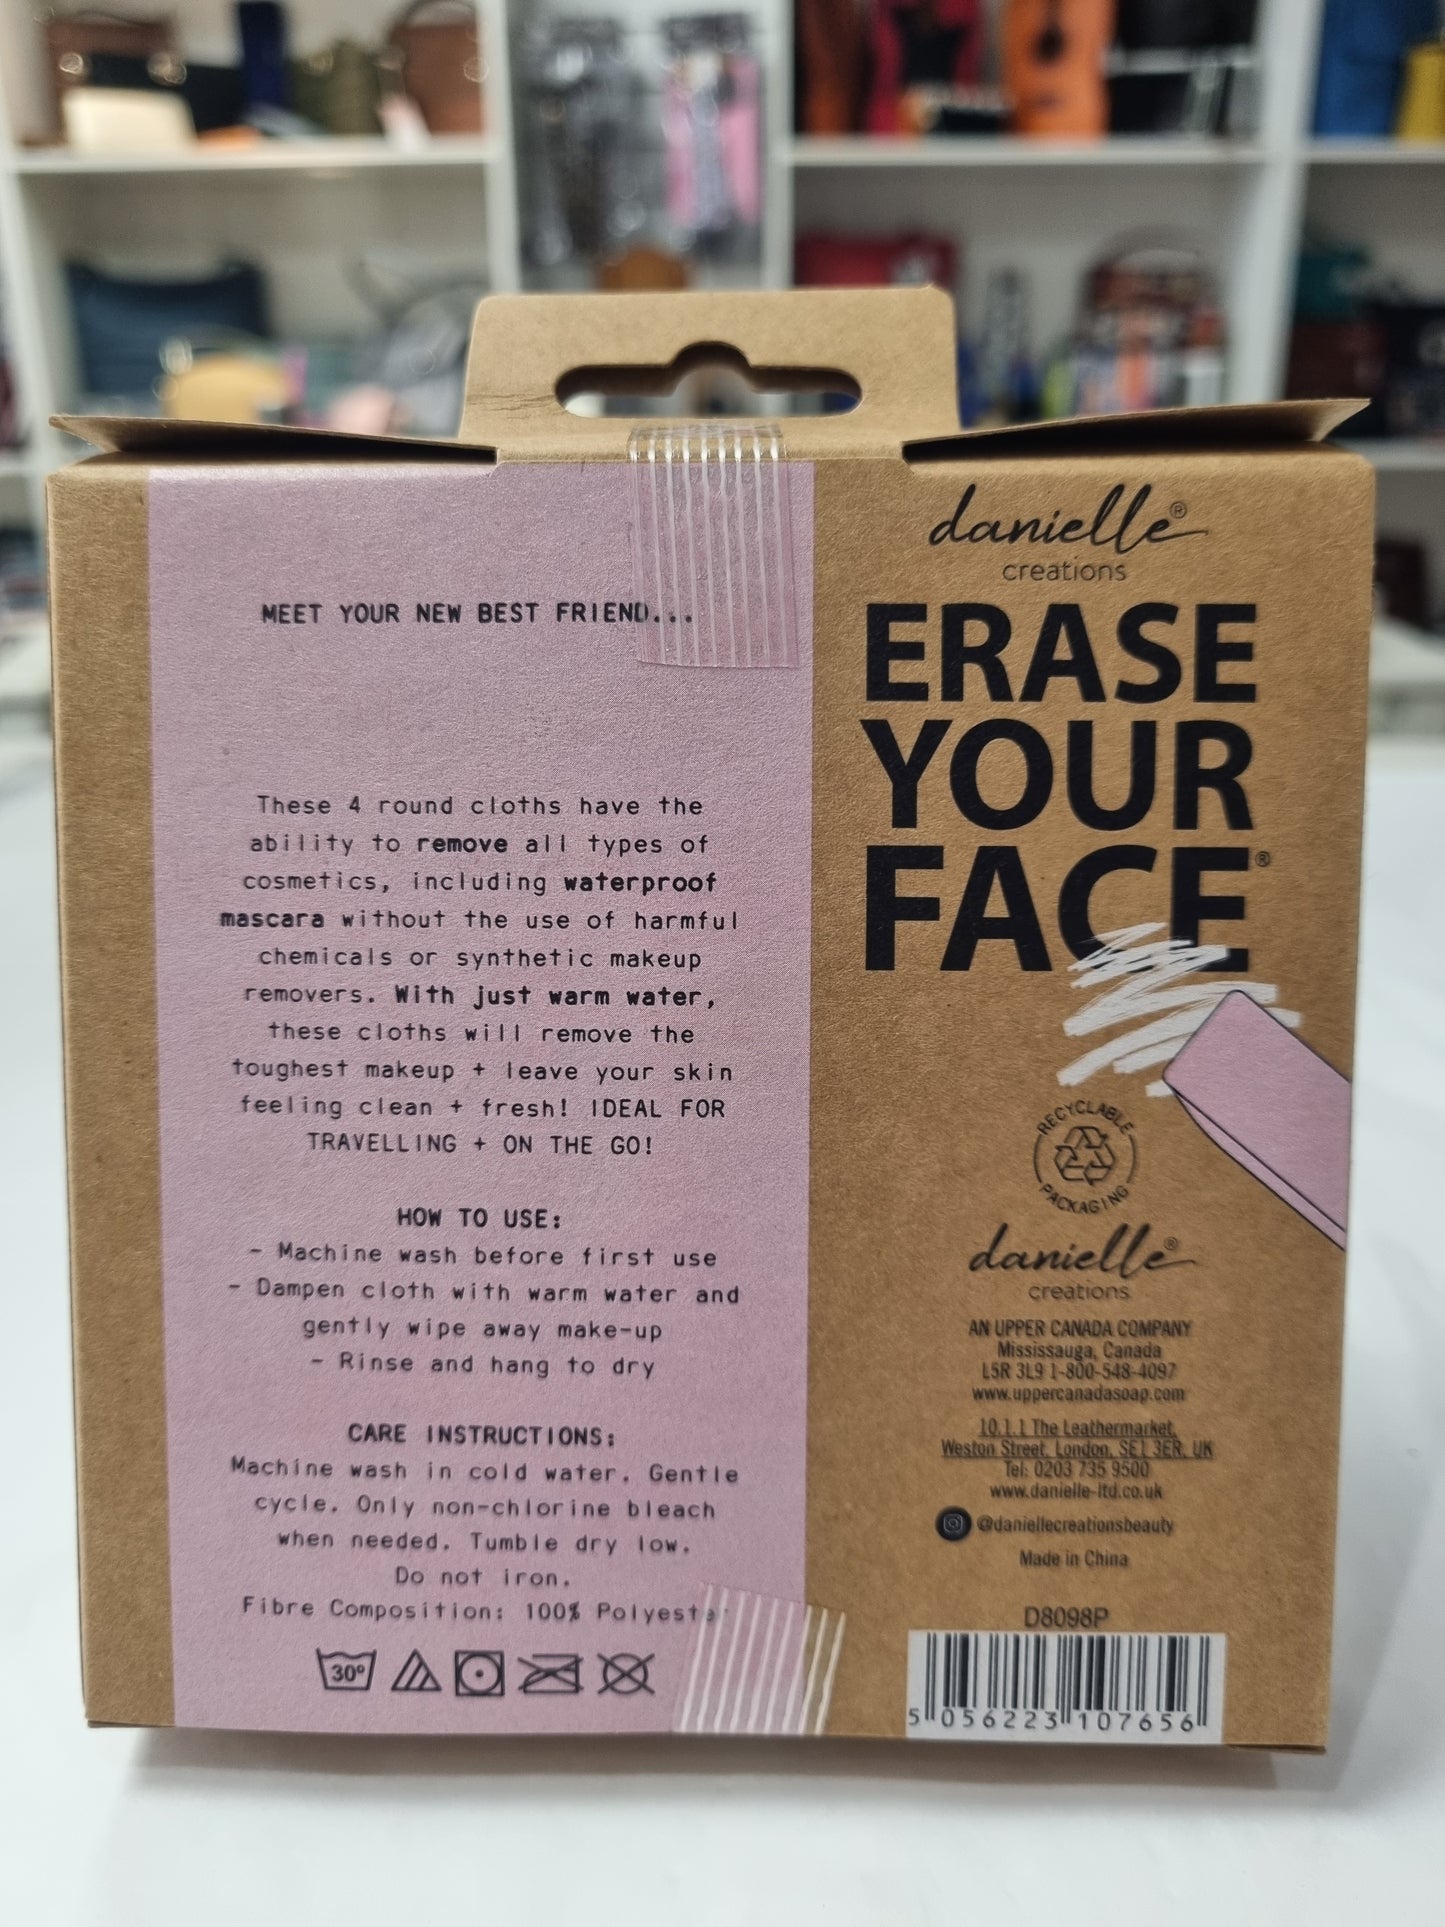 Erase Your Face - Reusable Make Up Removing pads